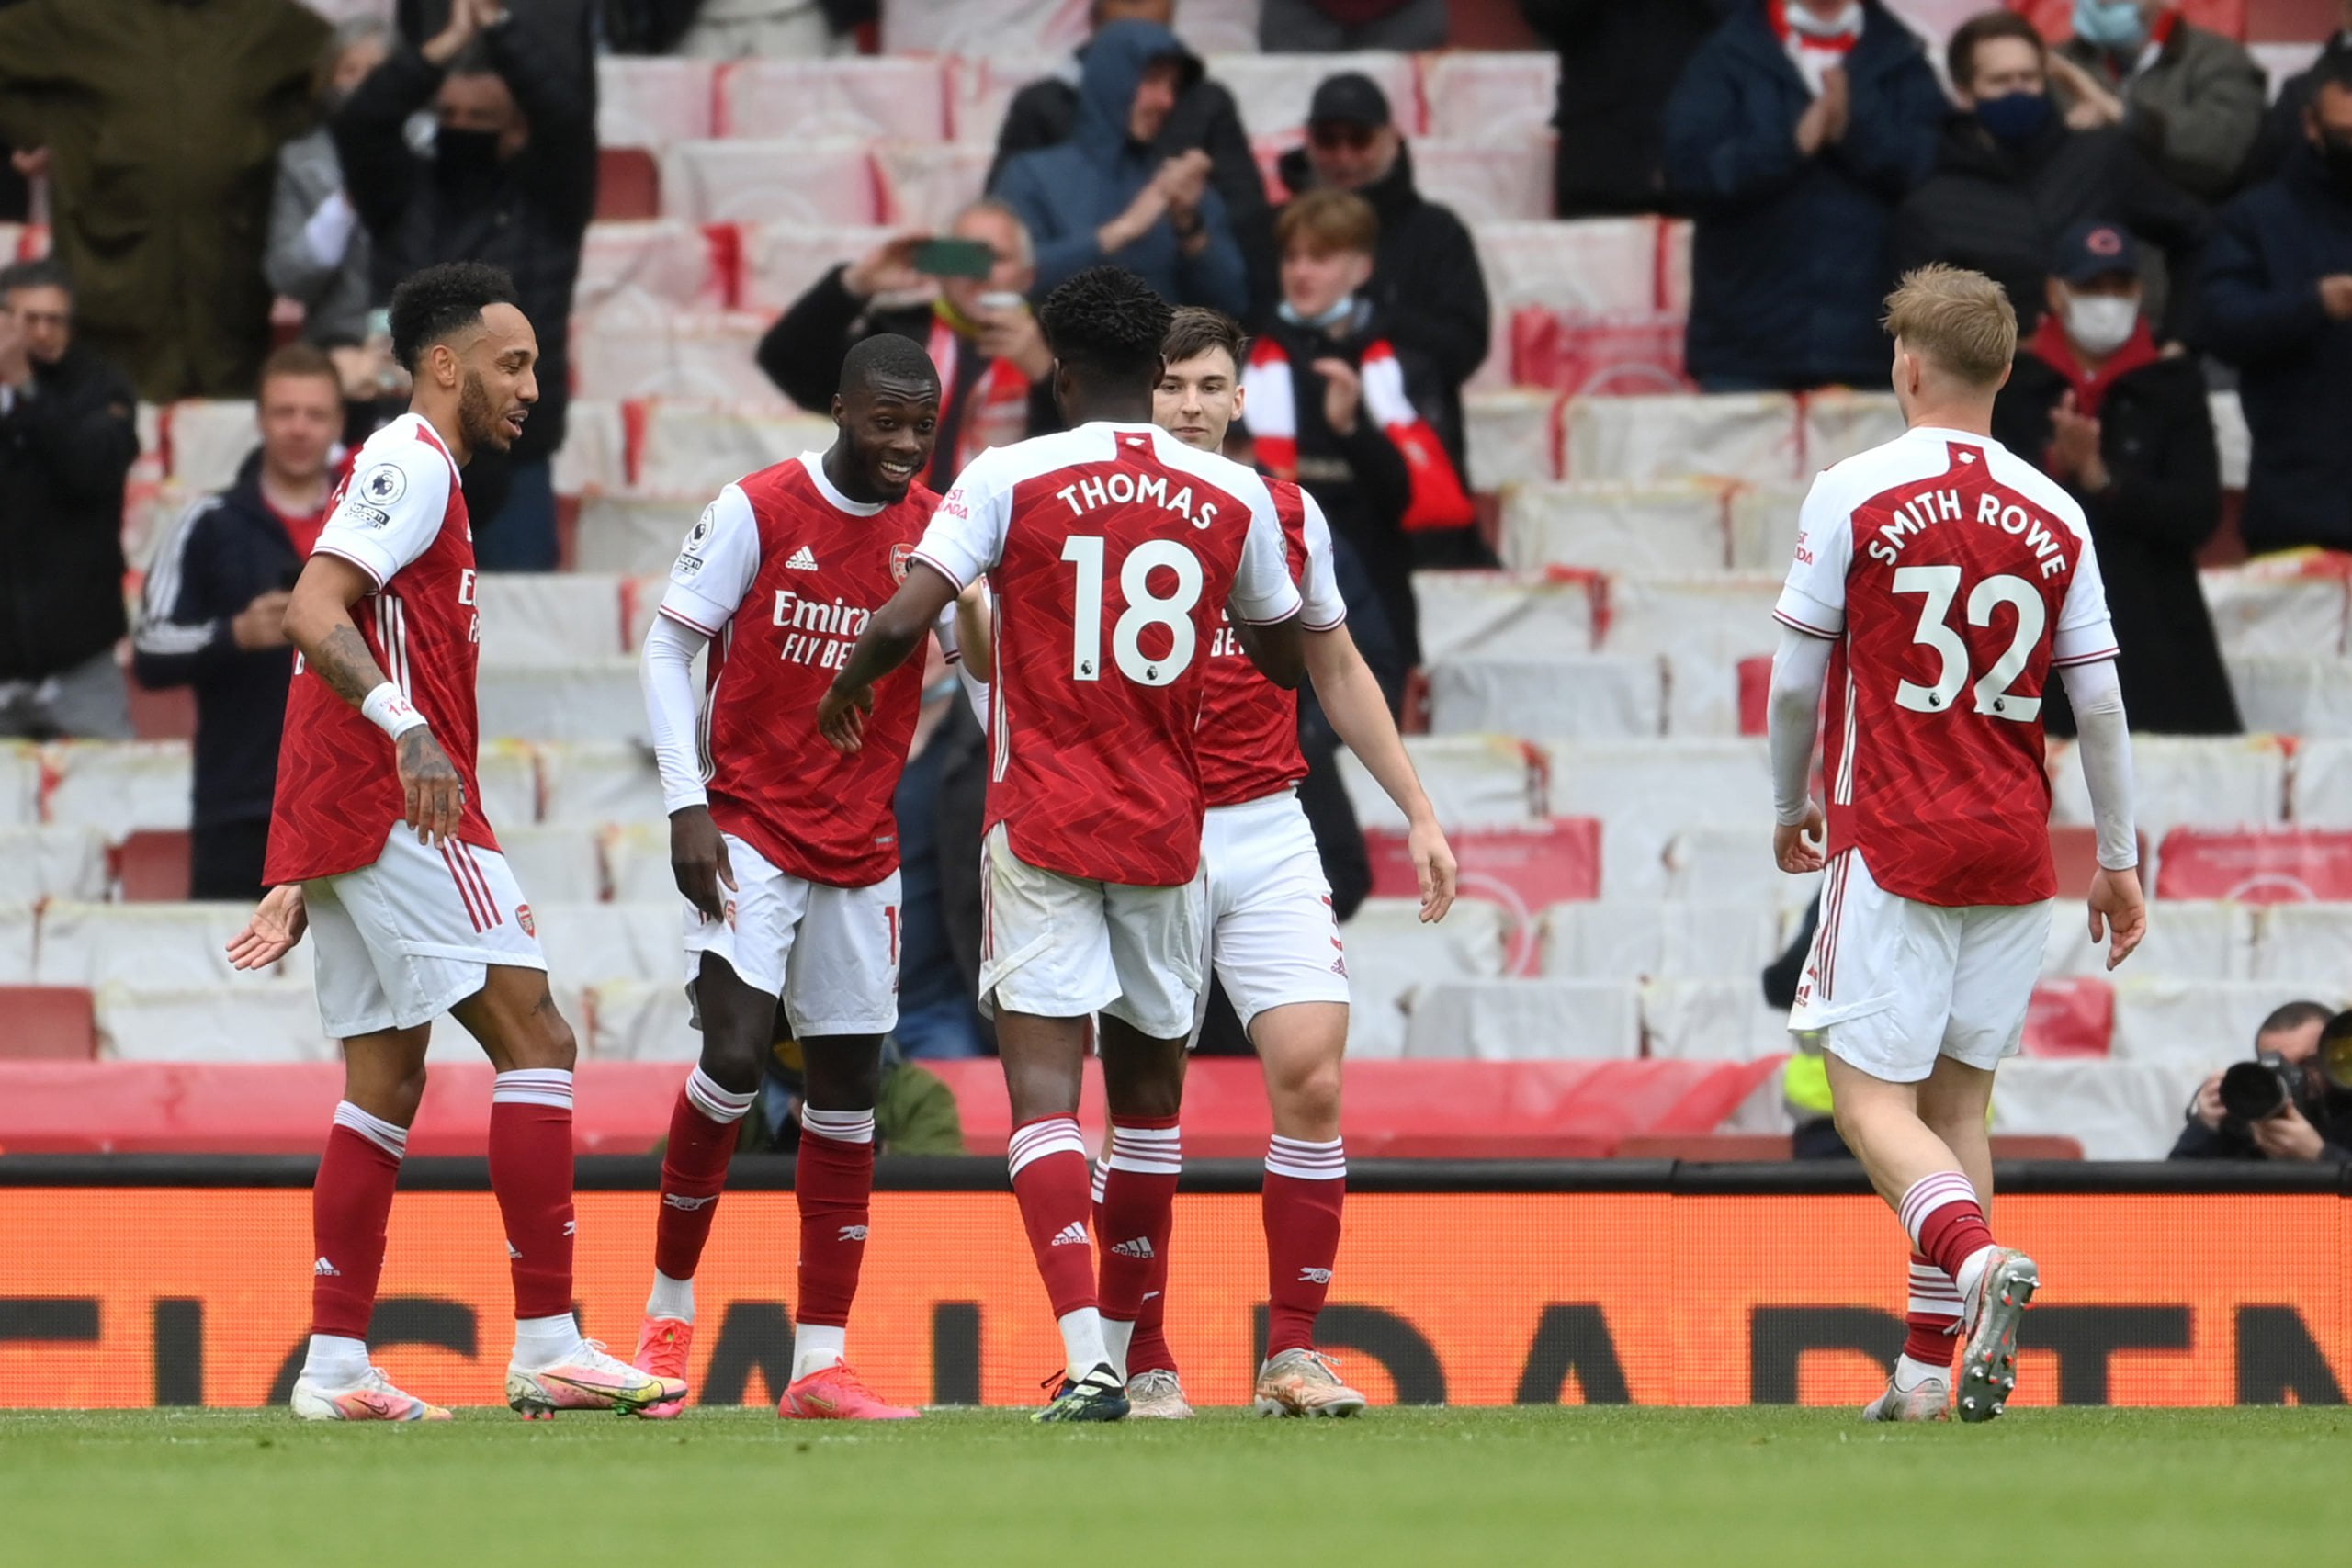 LONDON, ENGLAND - MAY 23: Nicolas Pepe of Arsenal celebrates after scoring their team's second goal with Thomas Partey, Kieran Tierney, Pierre-Emerick Aubameyang and Emile Smith Rowe  during the Premier League match between Arsenal and Brighton & Hove Albion at Emirates Stadium on May 23, 2021 in London, England. A limited number of fans will be allowed into Premier League stadiums as Coronavirus restrictions begin to ease in the UK. (Photo by Mike Hewitt/Getty Images)